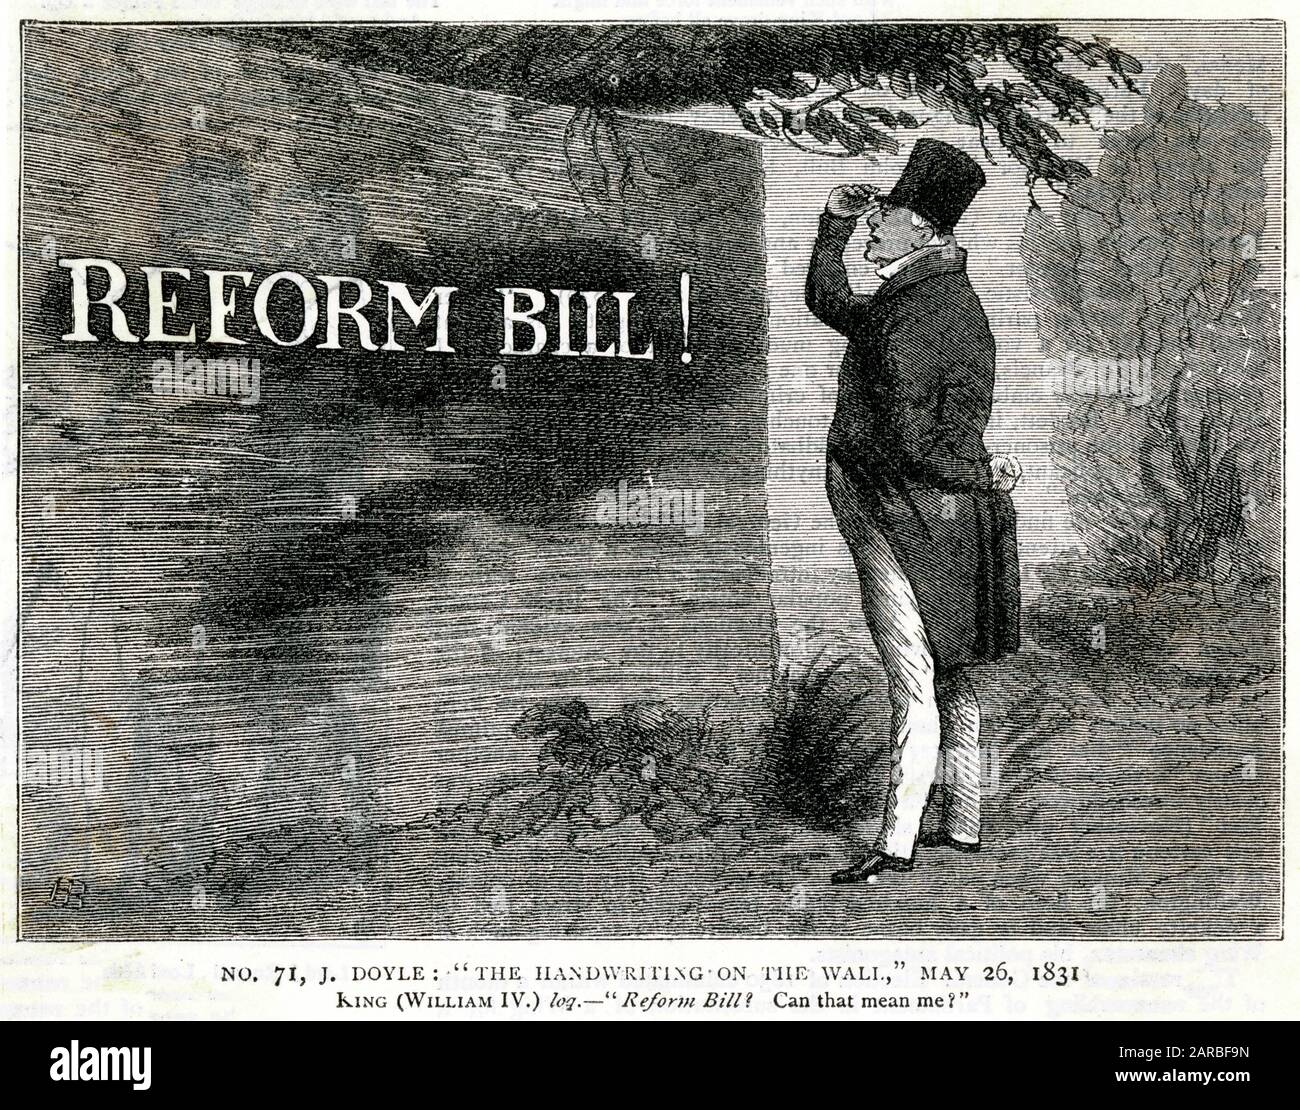 Cartoon, The Handwriting on the Wall. King William IV wonders if the Reform Bill has anything to do with him. The Reform Act, extending the franchise by just over 50 per cent, and ensuring that large industrial cities were properly represented, eventually became law in June 1832.      Date: 1831 Stock Photo